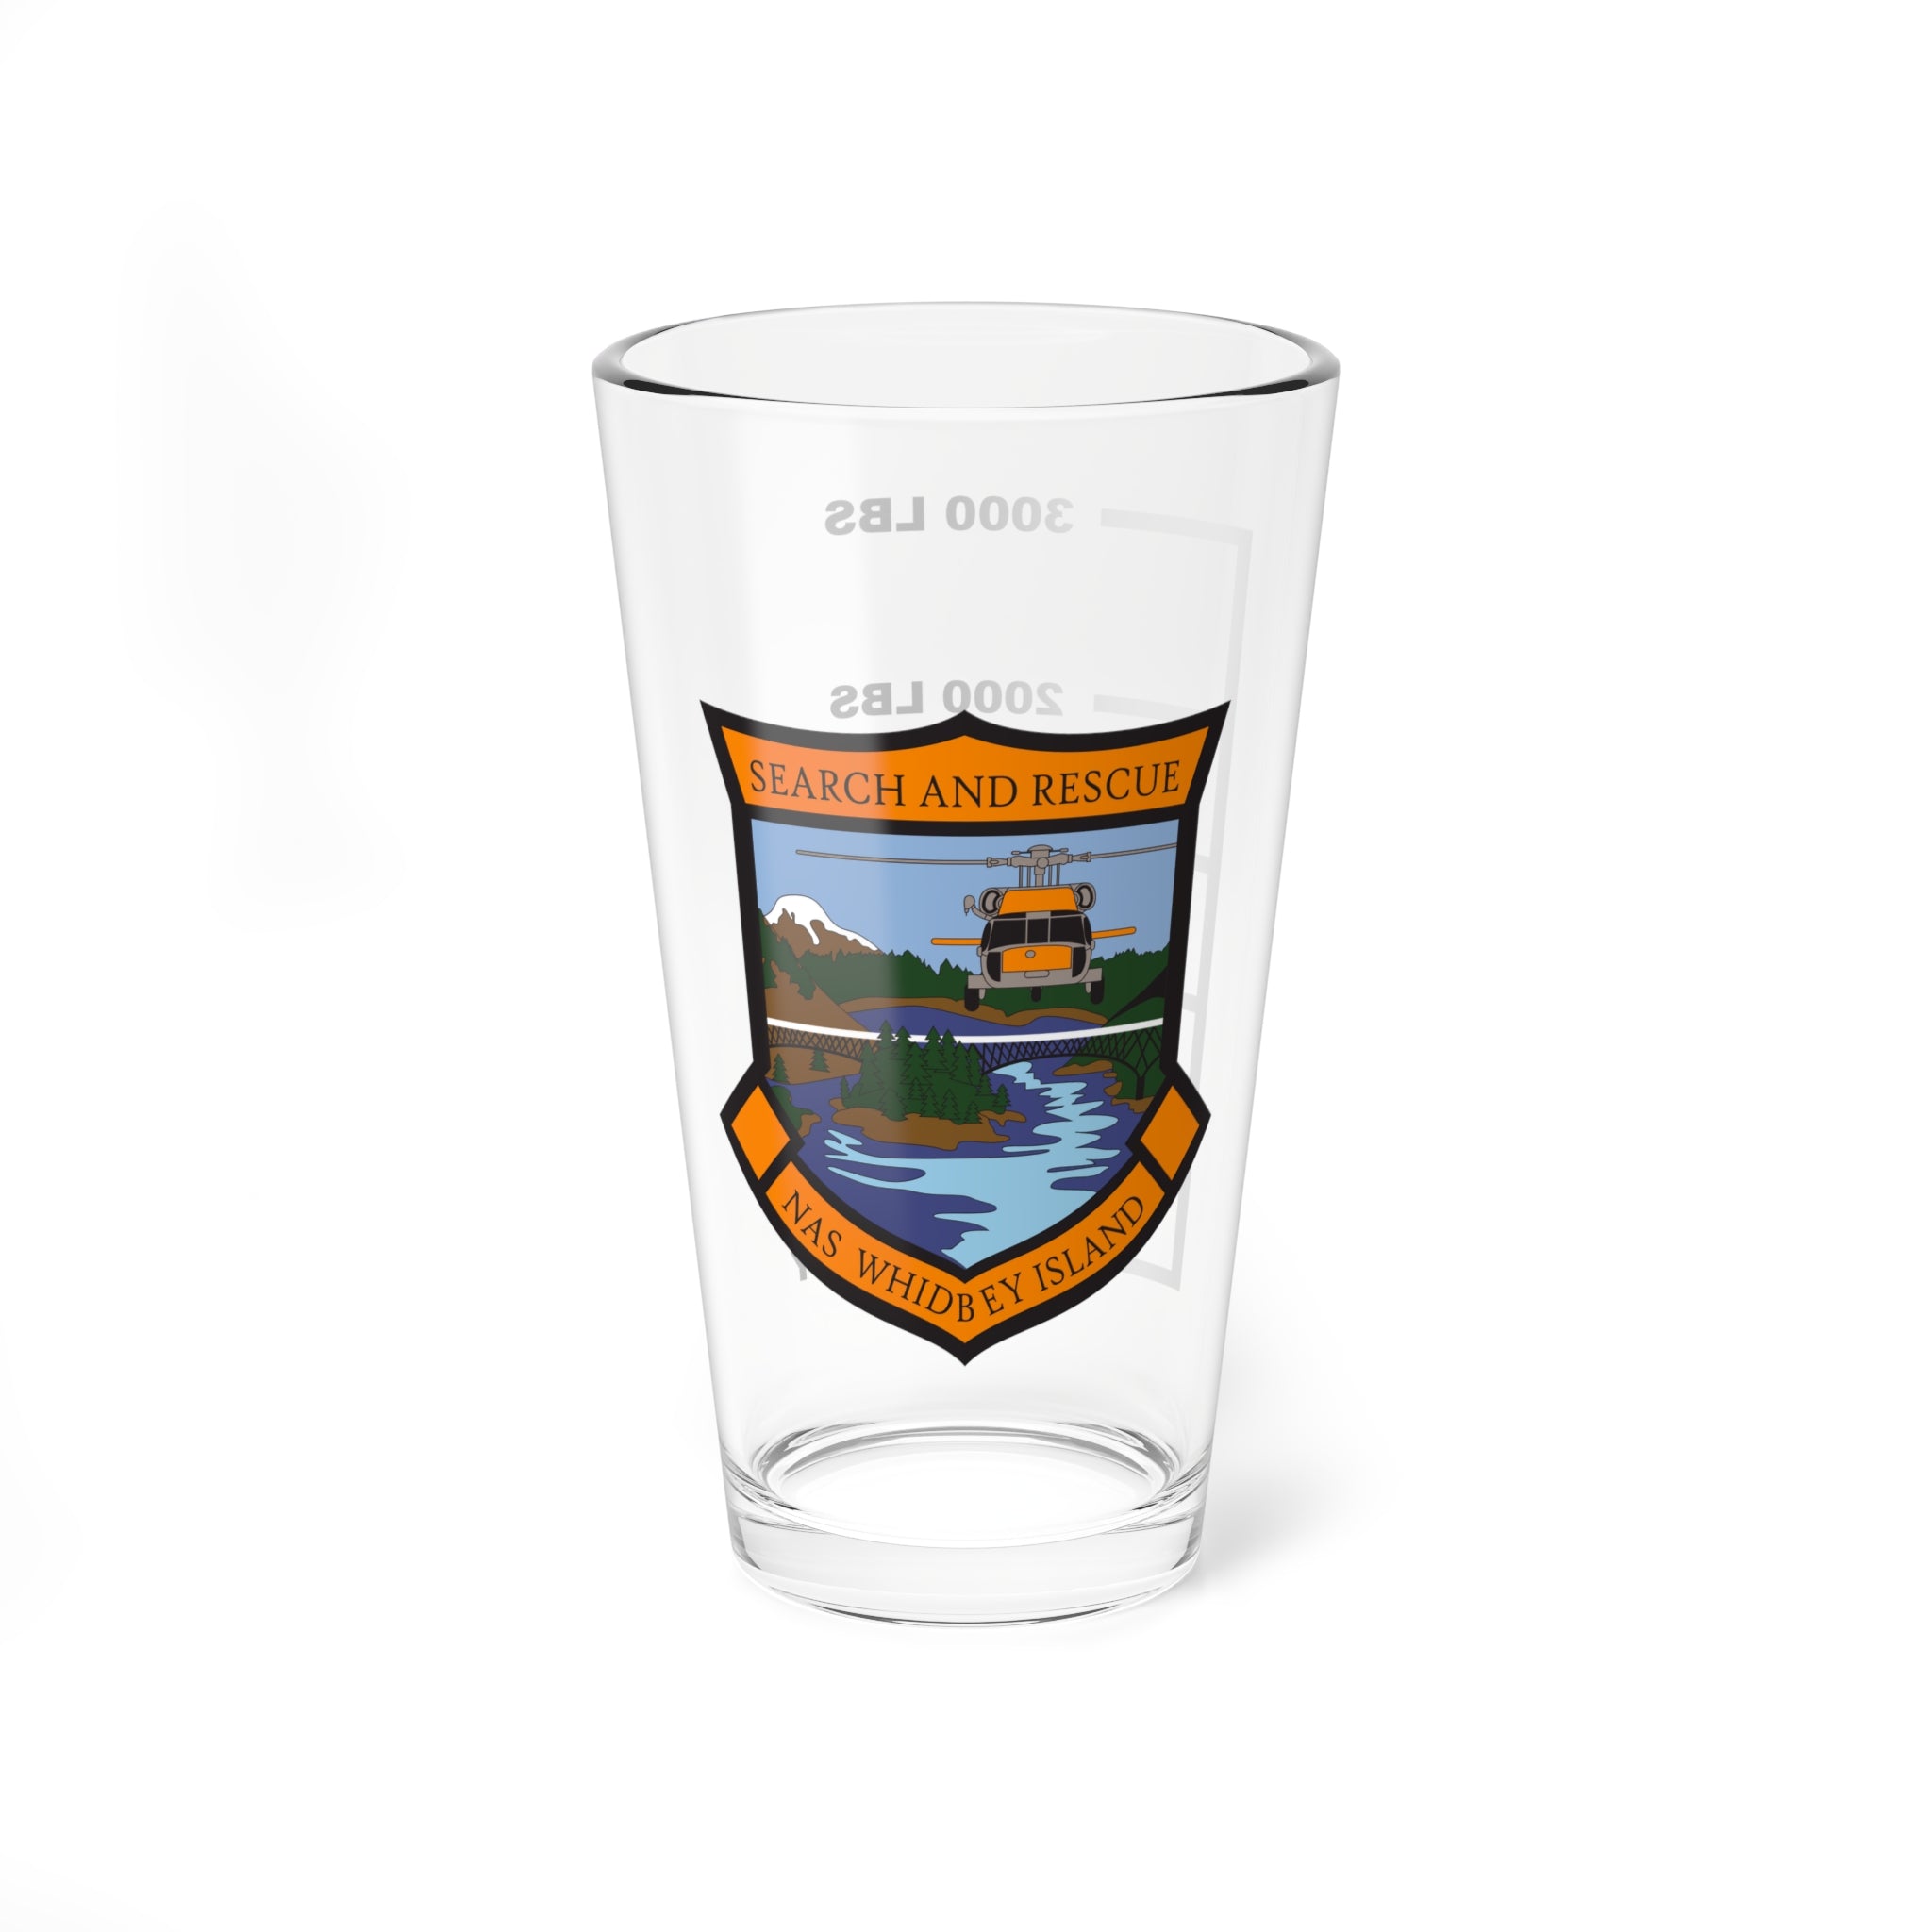 NAS Whidbey Island MH-60 Station SAR Fuel Low Pint Glass, Search and Rescue, Naval Aviation, Wings, Veteran